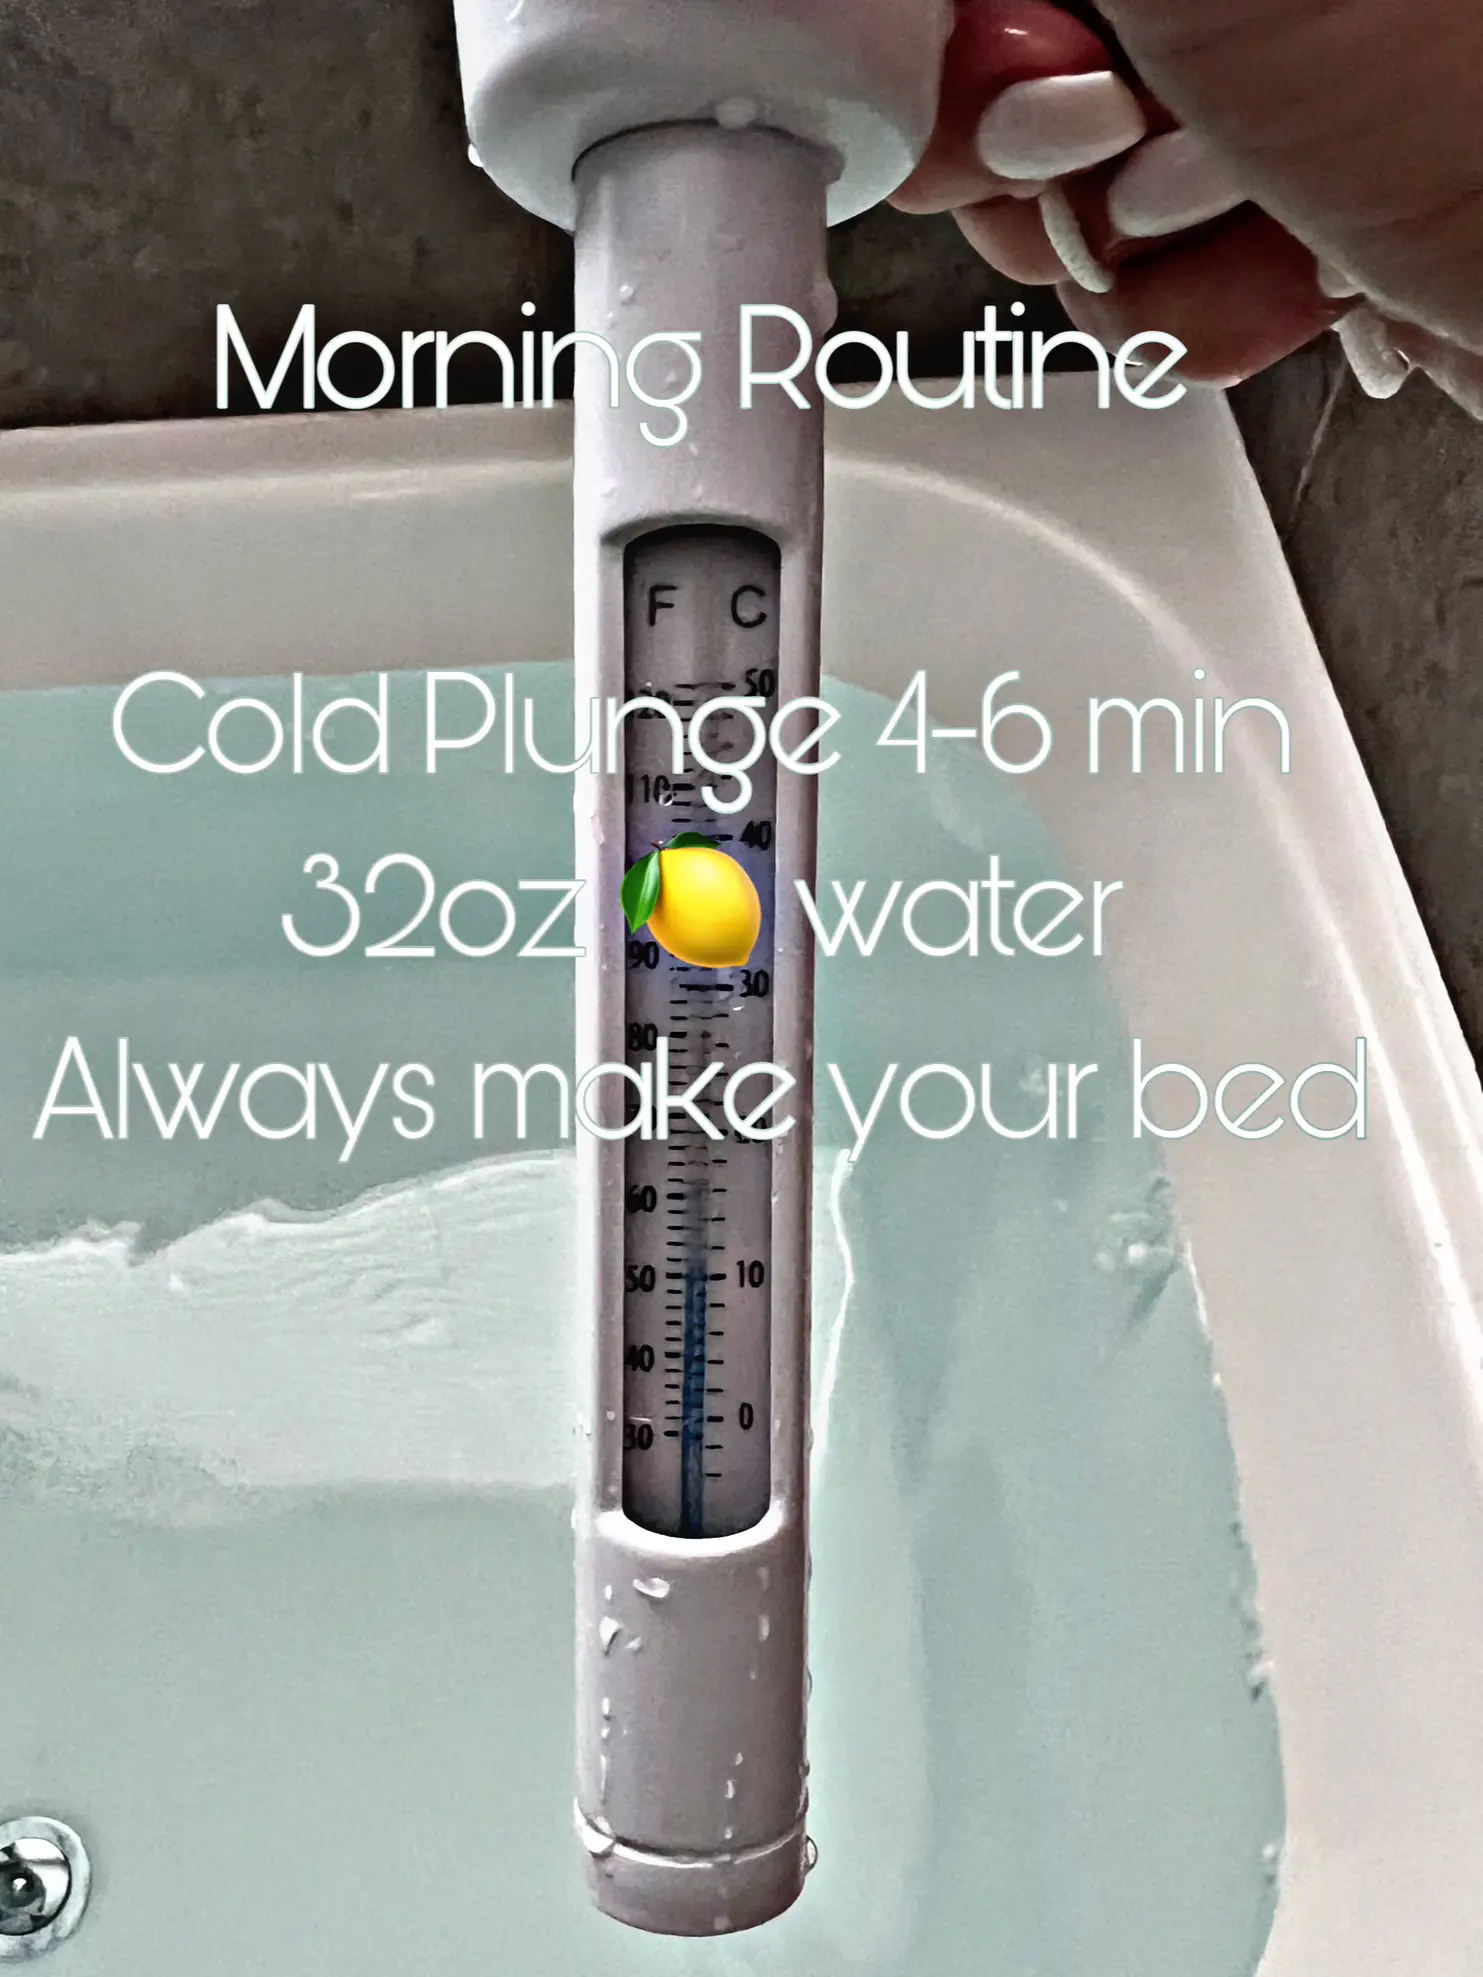 Cold Plunge is as easy as filling your tub. ❄️, Video published by NüFox